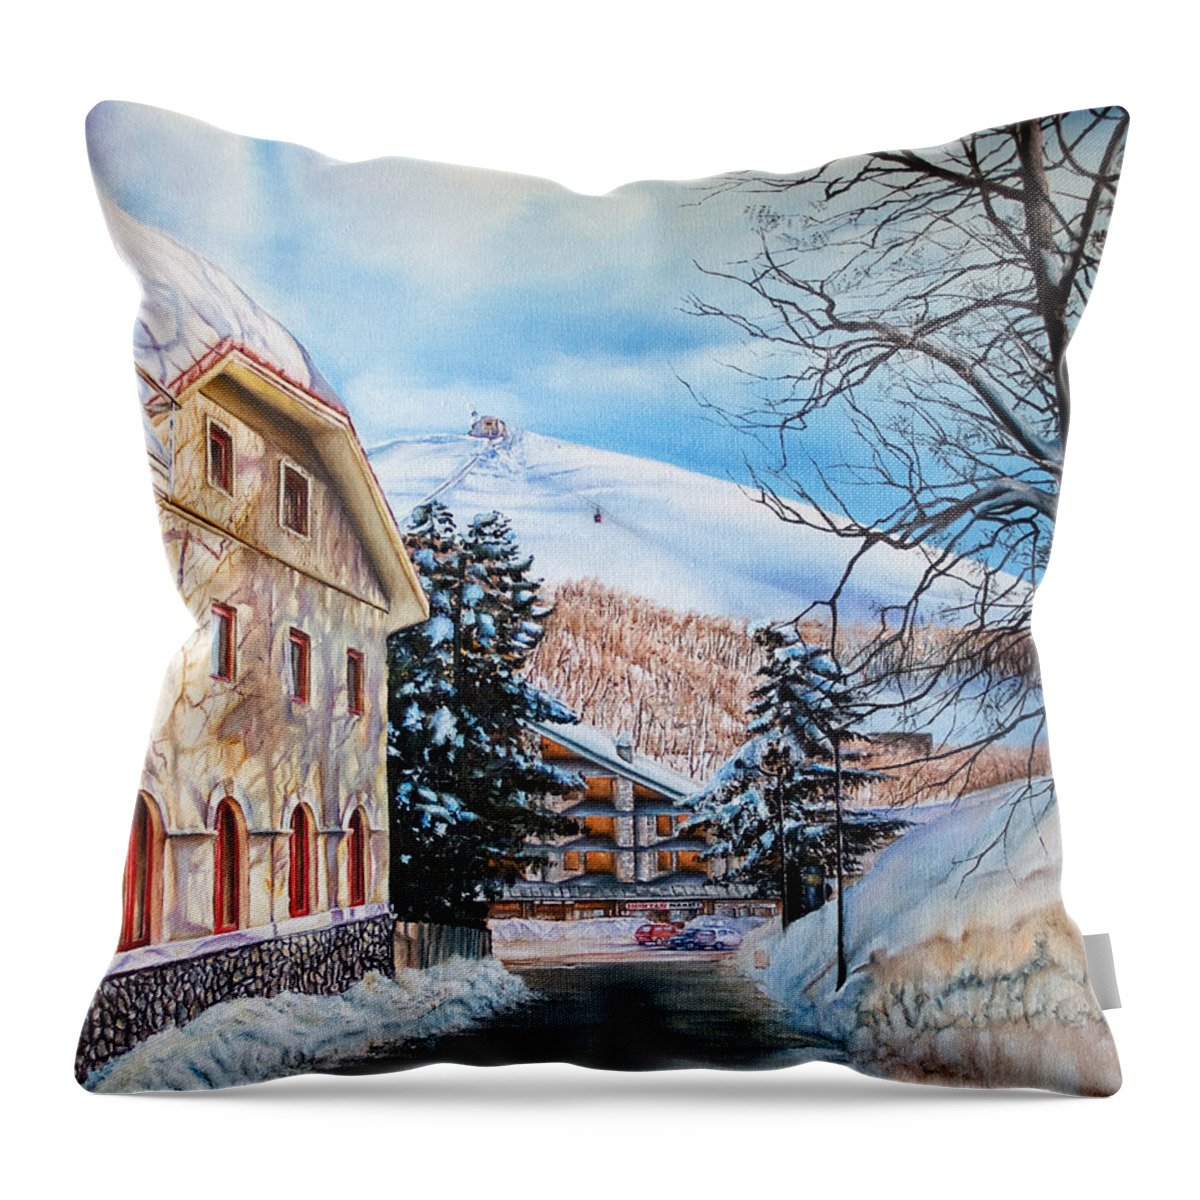 Ski Resort Throw Pillow featuring the painting Terminillo by Michelangelo Rossi